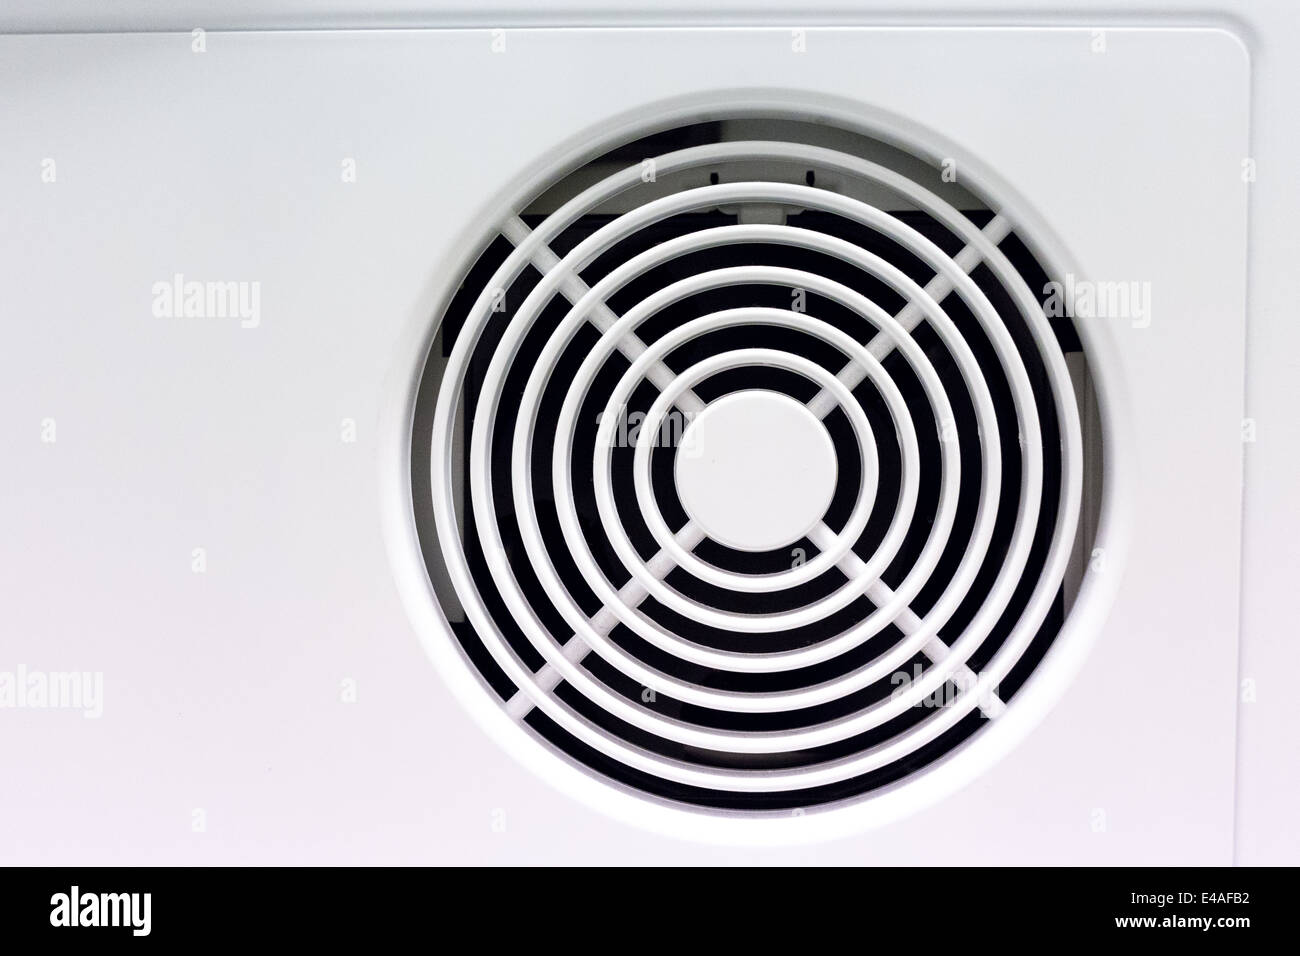 The air intake on a tumble dryer Stock Photo